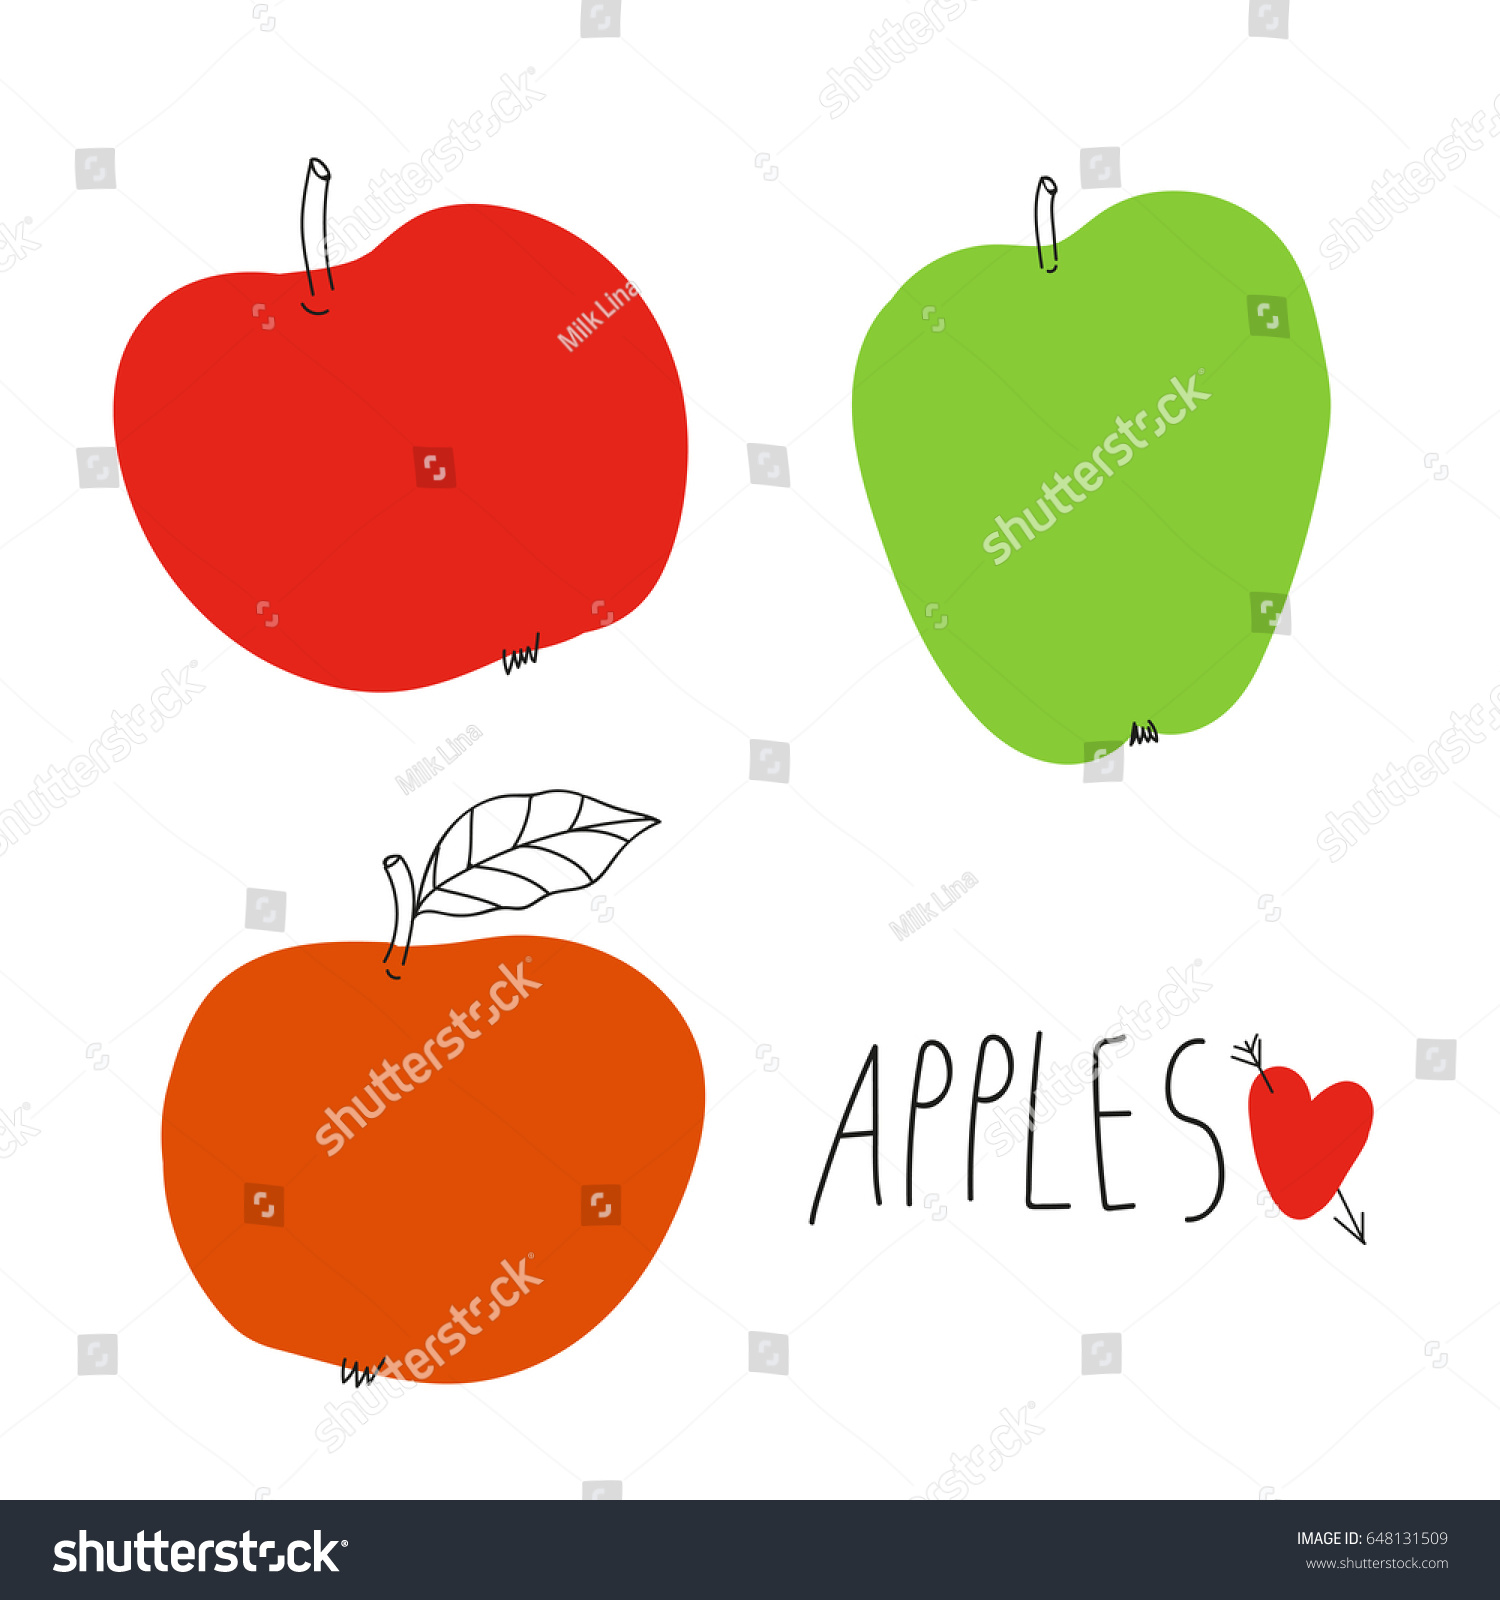 Set Apples Abstract Vector Illustration Stock Vector 648131509 ...